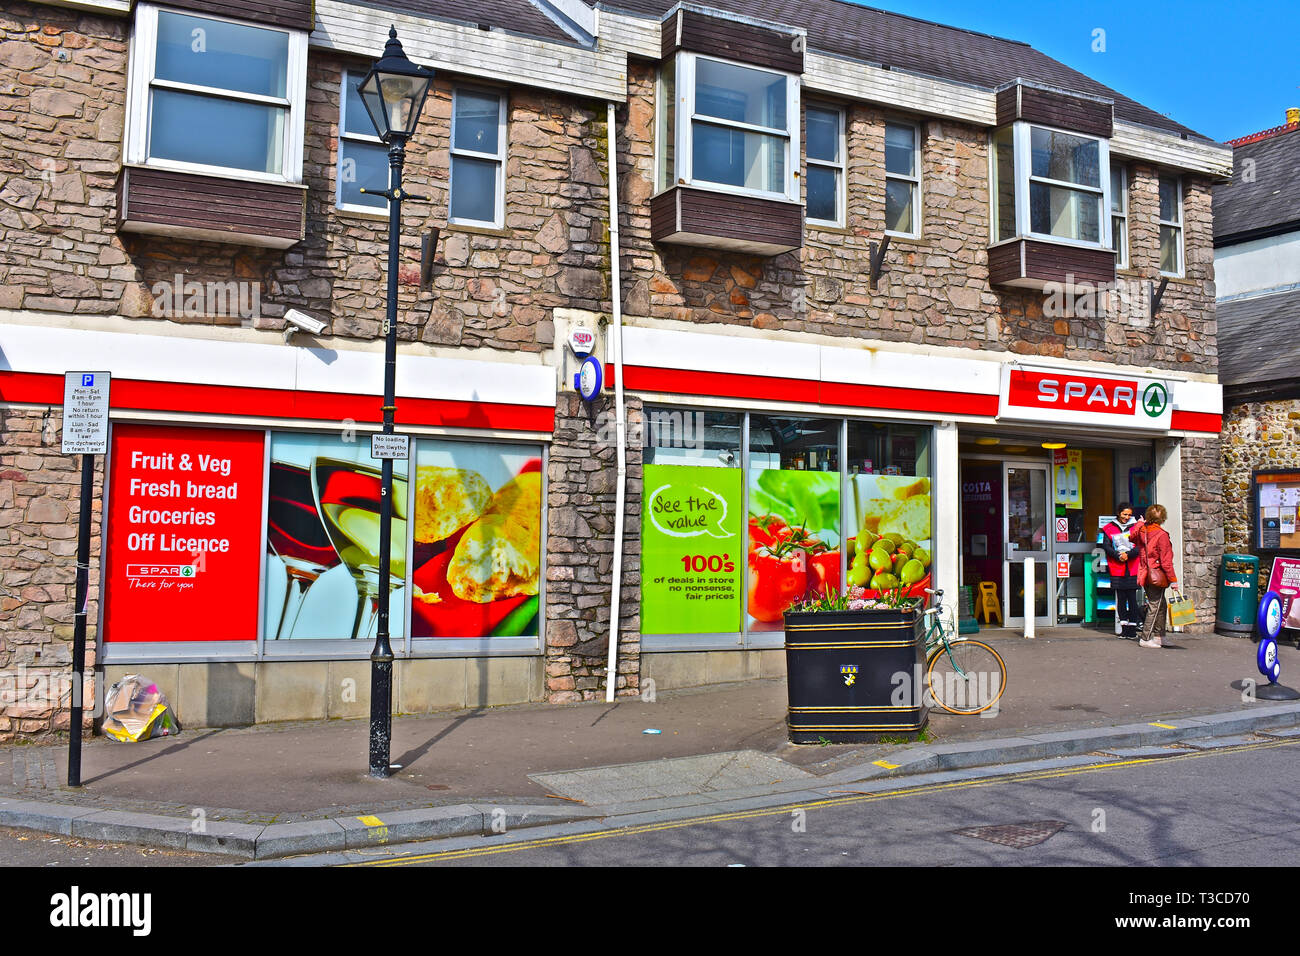 Spar shop in High Street in the Village of Llandaff., Cardiff, S.Wales Stock Photo